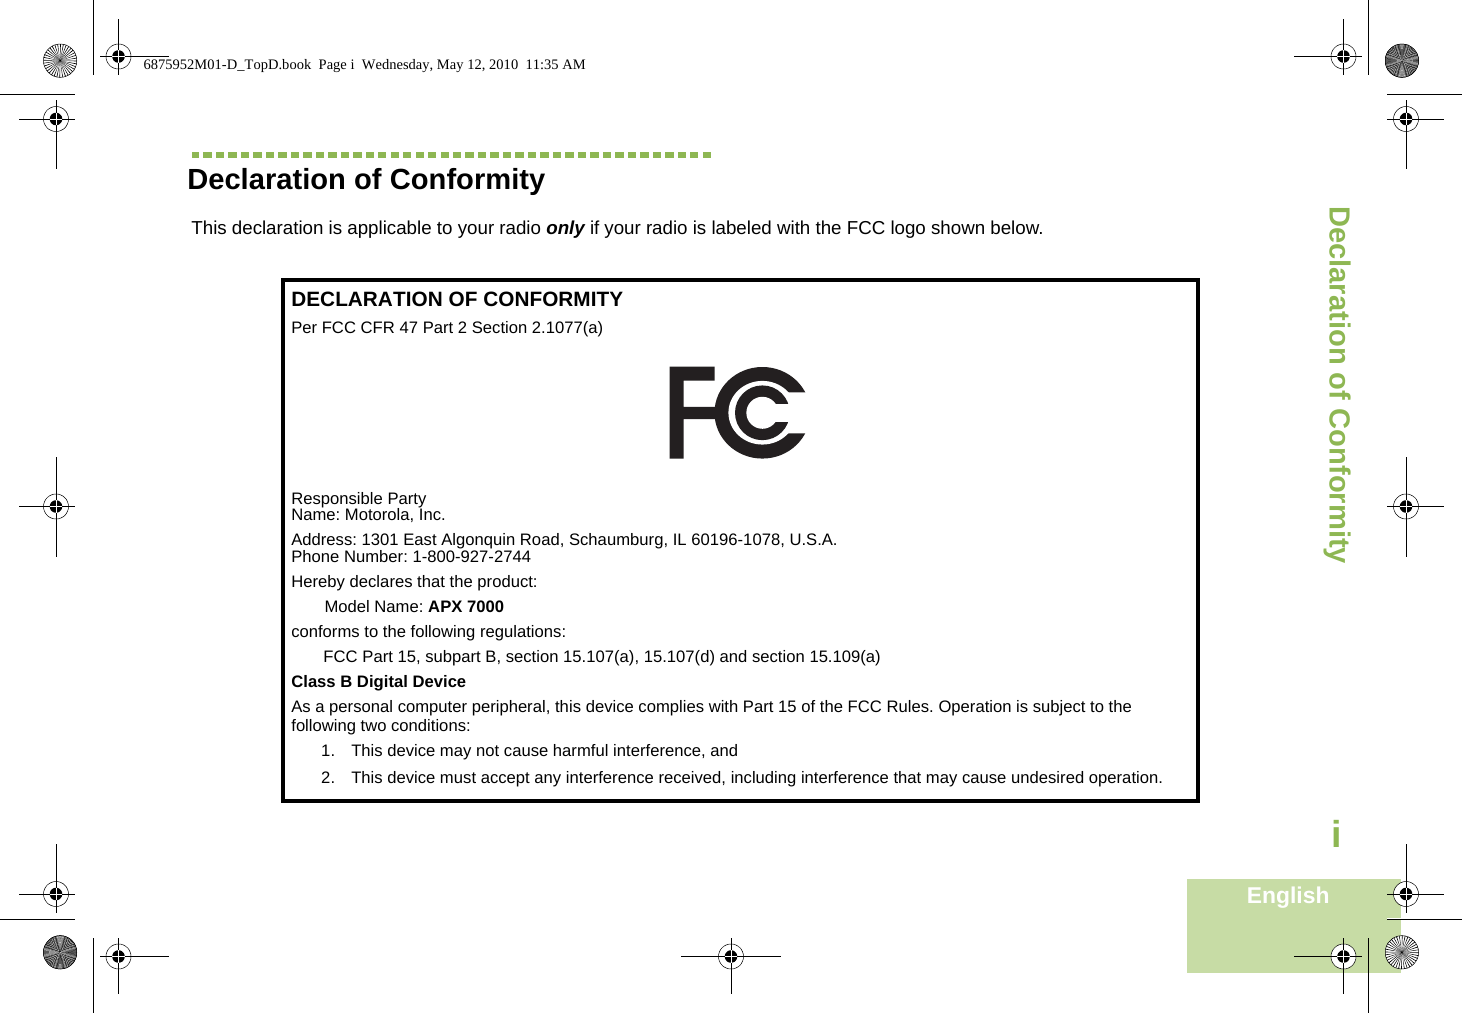 Declaration of ConformityEnglishiDeclaration of ConformityThis declaration is applicable to your radio only if your radio is labeled with the FCC logo shown below.DECLARATION OF CONFORMITYPer FCC CFR 47 Part 2 Section 2.1077(a)Responsible Party Name: Motorola, Inc.Address: 1301 East Algonquin Road, Schaumburg, IL 60196-1078, U.S.A.Phone Number: 1-800-927-2744Hereby declares that the product:Model Name: APX 7000conforms to the following regulations:FCC Part 15, subpart B, section 15.107(a), 15.107(d) and section 15.109(a)Class B Digital DeviceAs a personal computer peripheral, this device complies with Part 15 of the FCC Rules. Operation is subject to the following two conditions:1. This device may not cause harmful interference, and 2. This device must accept any interference received, including interference that may cause undesired operation.6875952M01-D_TopD.book  Page i  Wednesday, May 12, 2010  11:35 AM